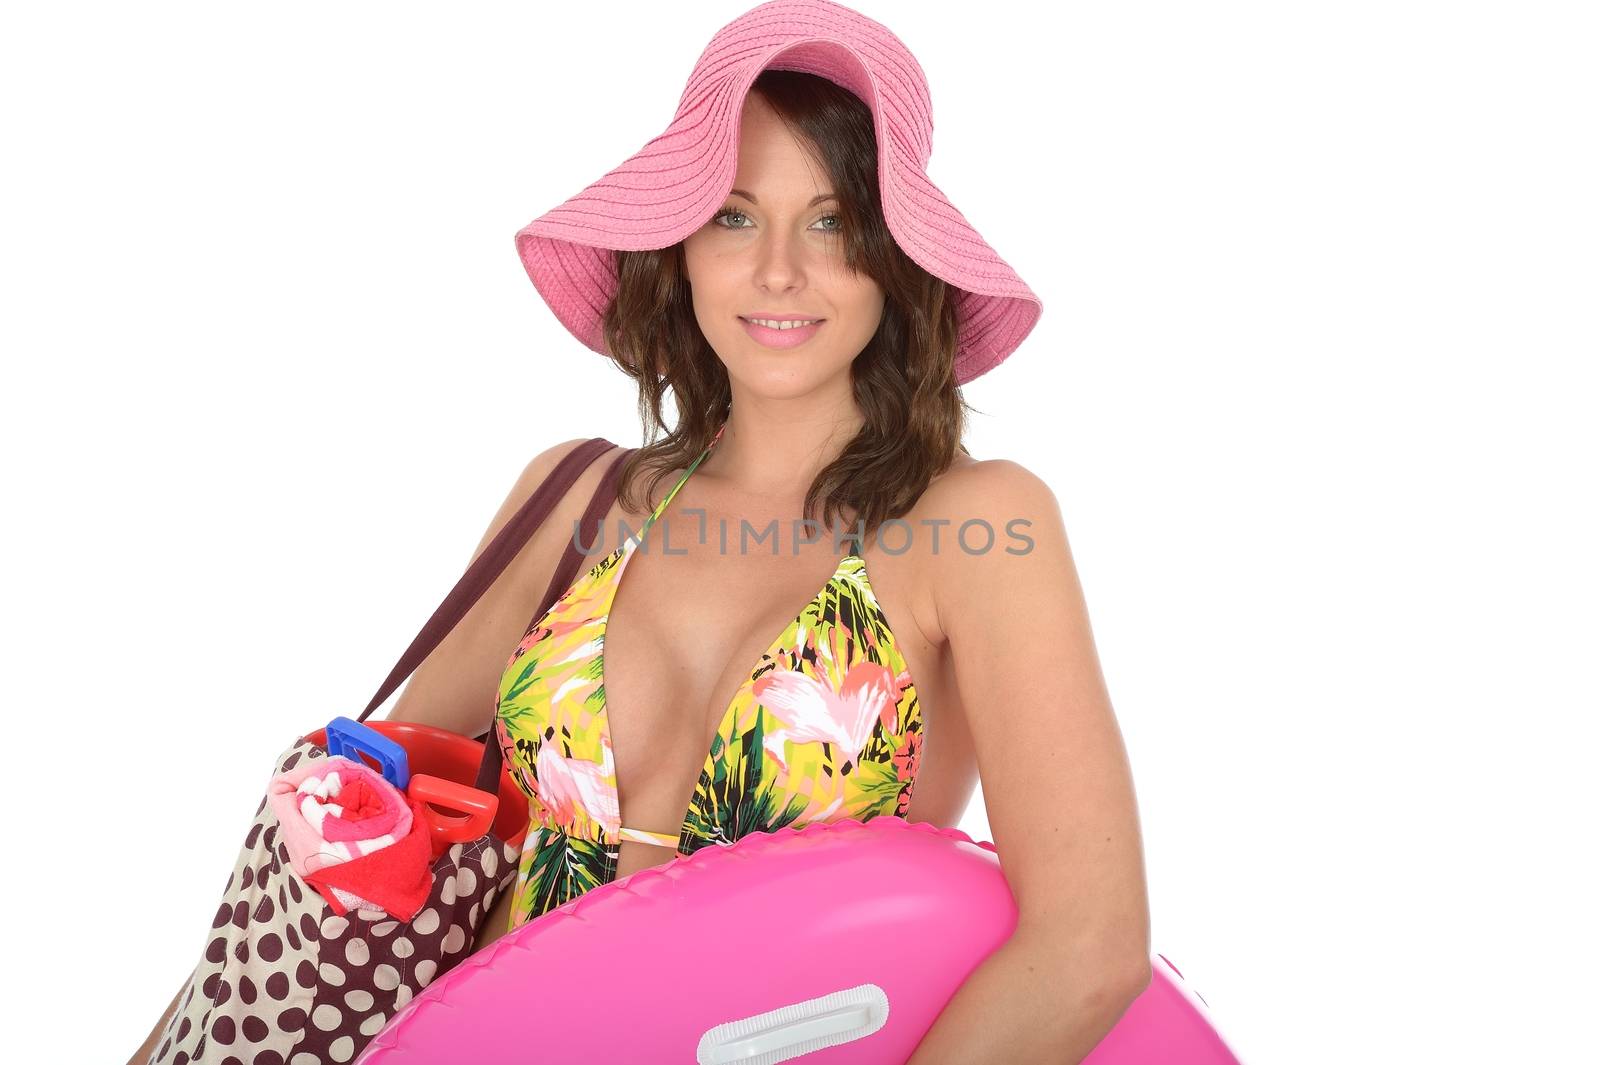 Young Woman Wearing a Swim Suit on Holiday Carrying a  Rubber Ri by Whiteboxmedia